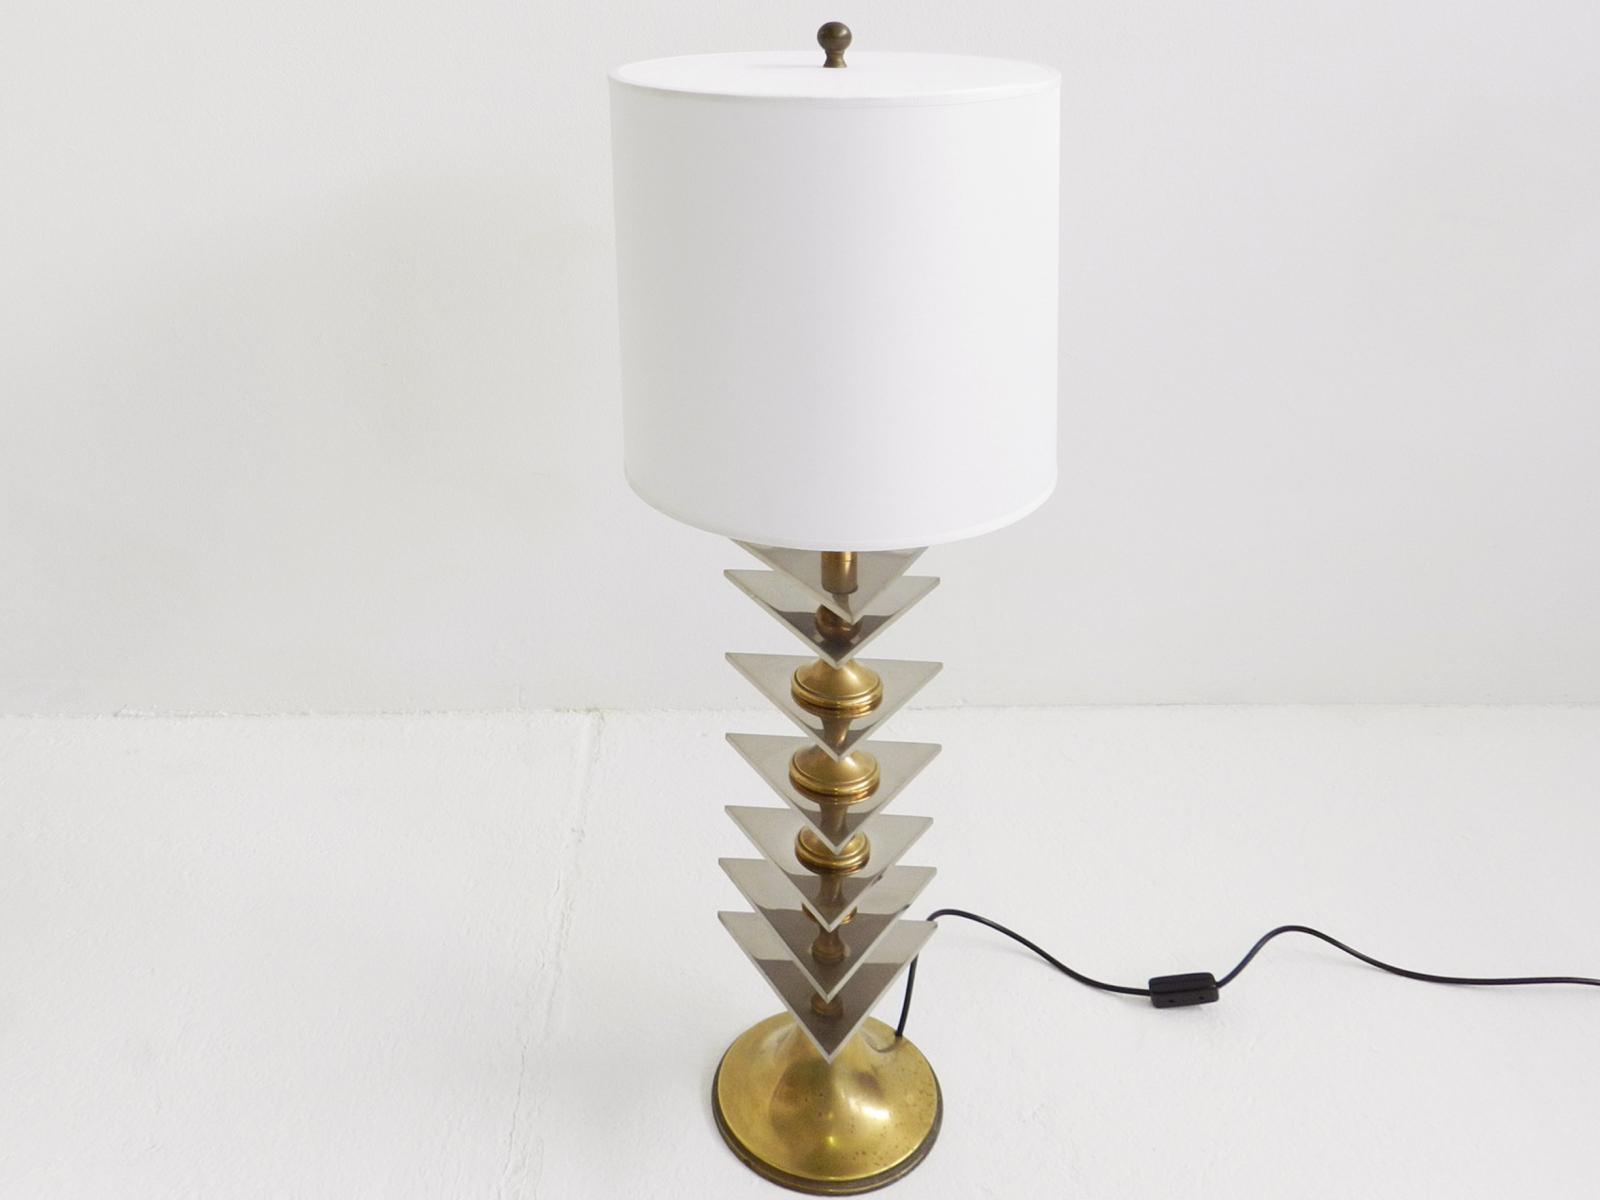 Large Italian Brass and Stainless Steel Table Lamp, 1960s for sale ...